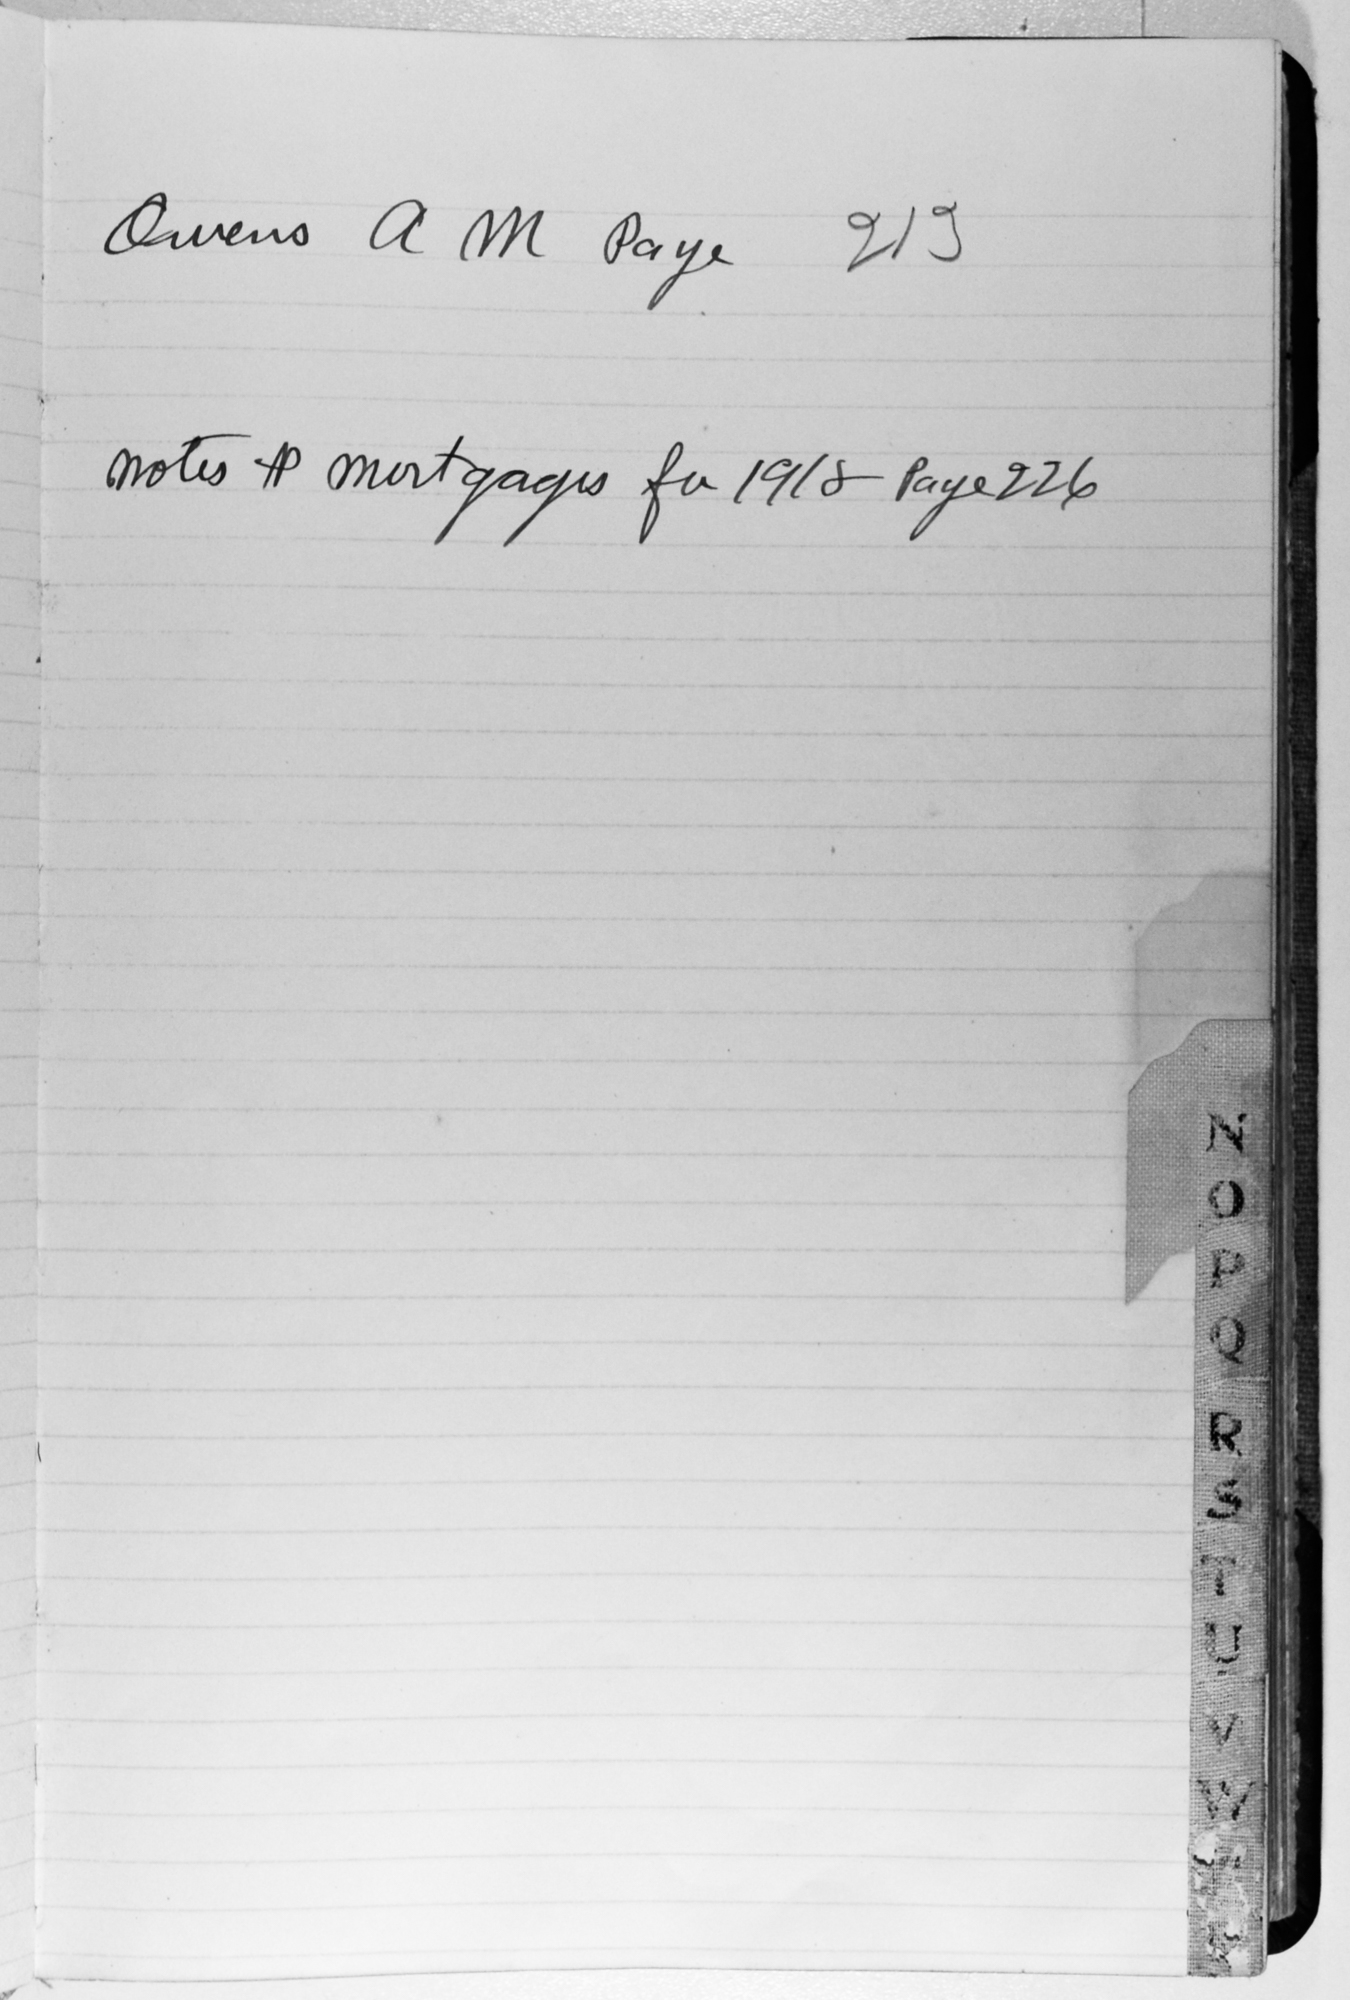 LEDGER PAGES FROM THE STORE 1912 - Alphabetical 